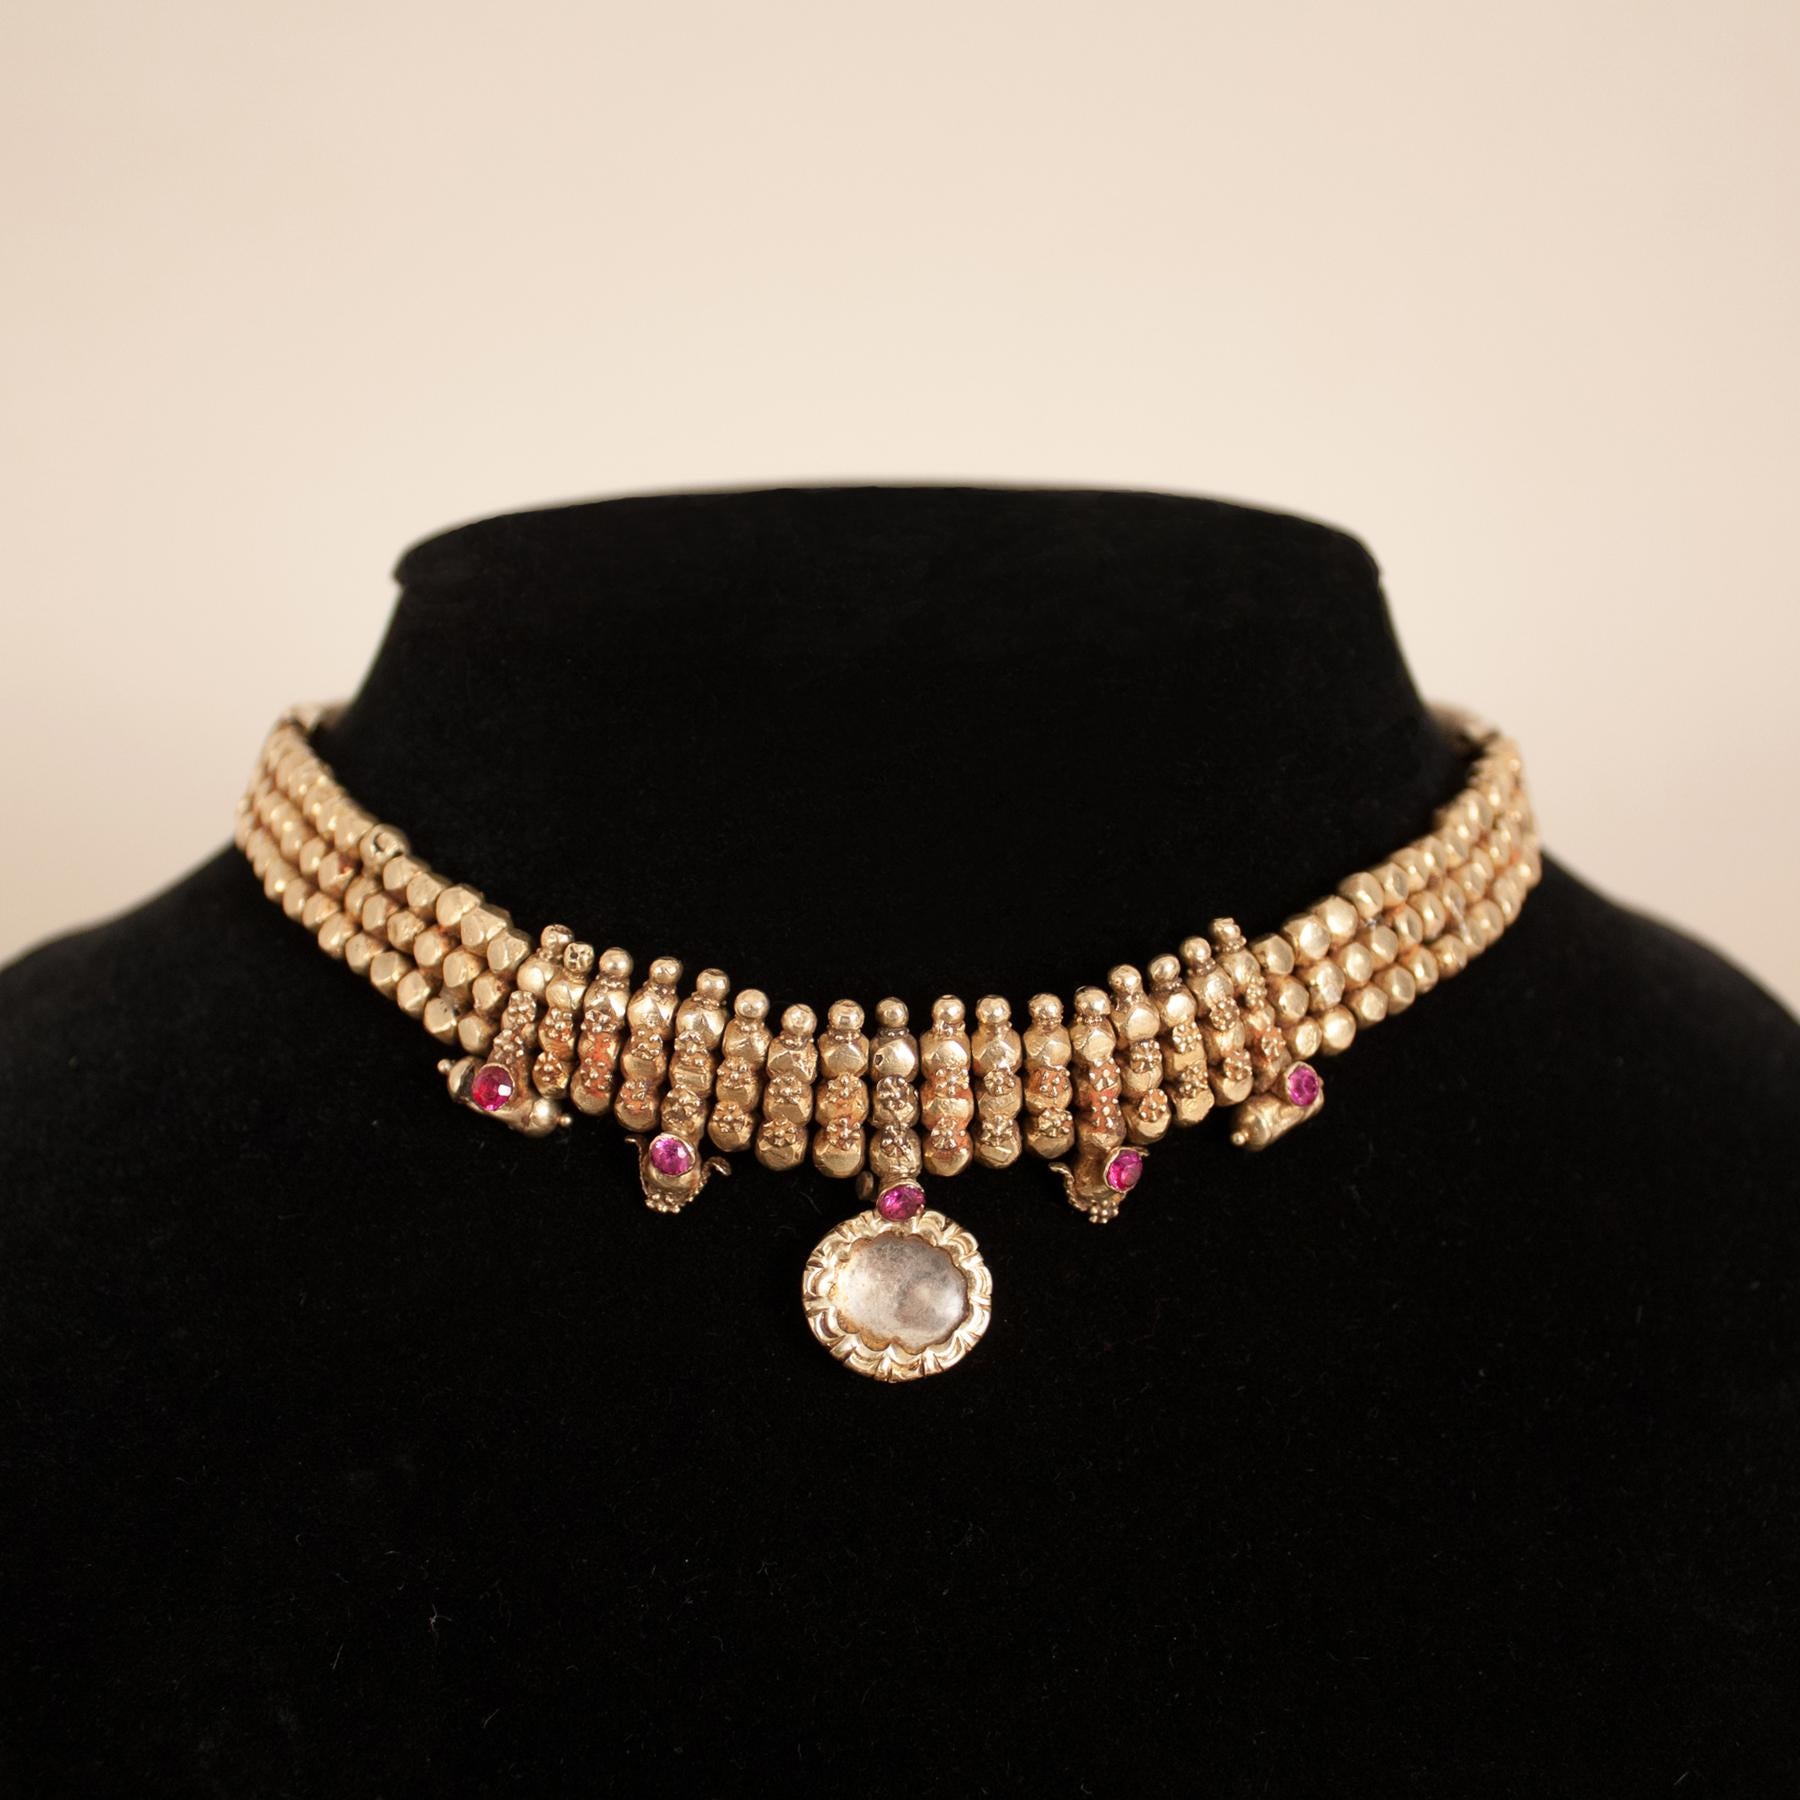 A 22 karat gold over wax bead traditional choker from Rajasthan, India, circa 1930. This exquisite necklace is adorned with fine gold granulation, faceted rubies, a foil-backed crystal centerpiece, two delicate amulets, and two ornaments. The